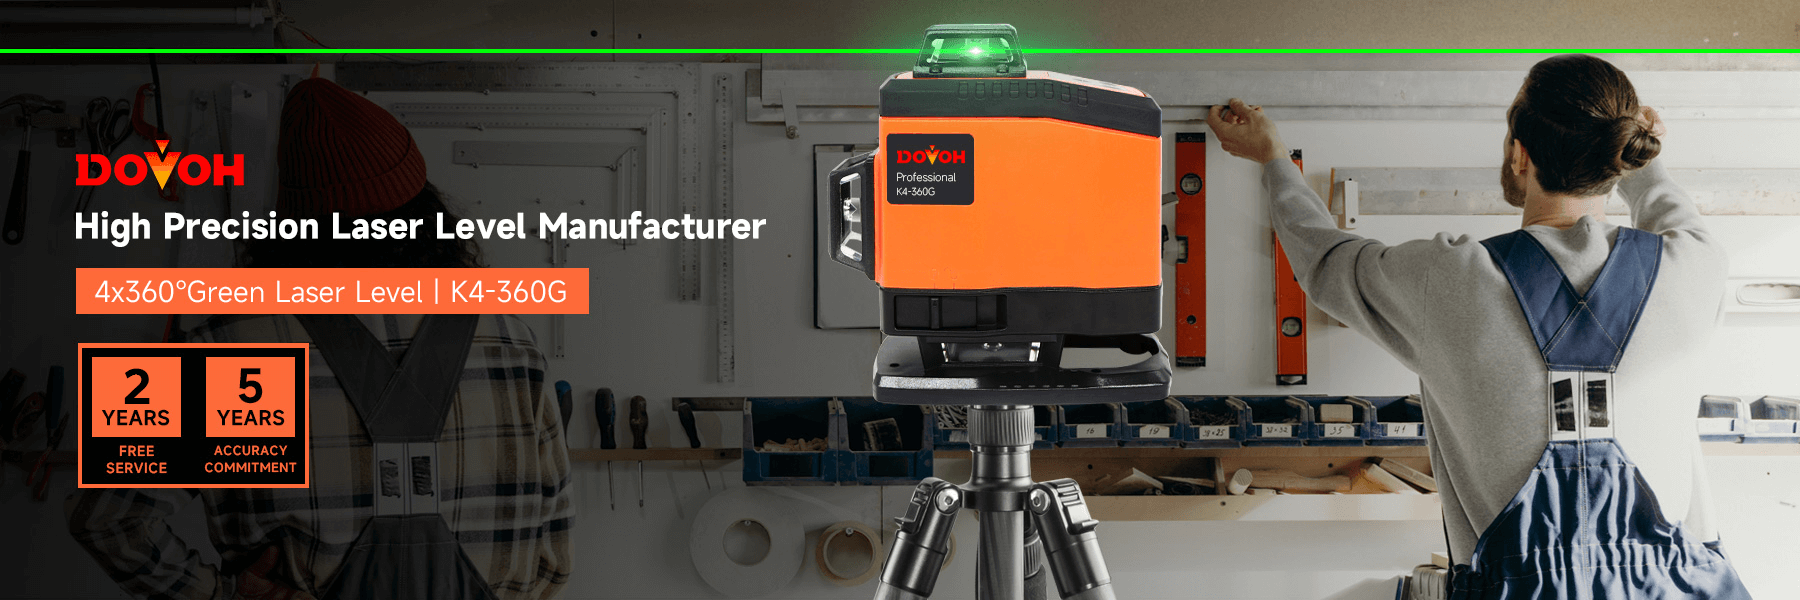 most accurate green laser level manufacturer Dovoh